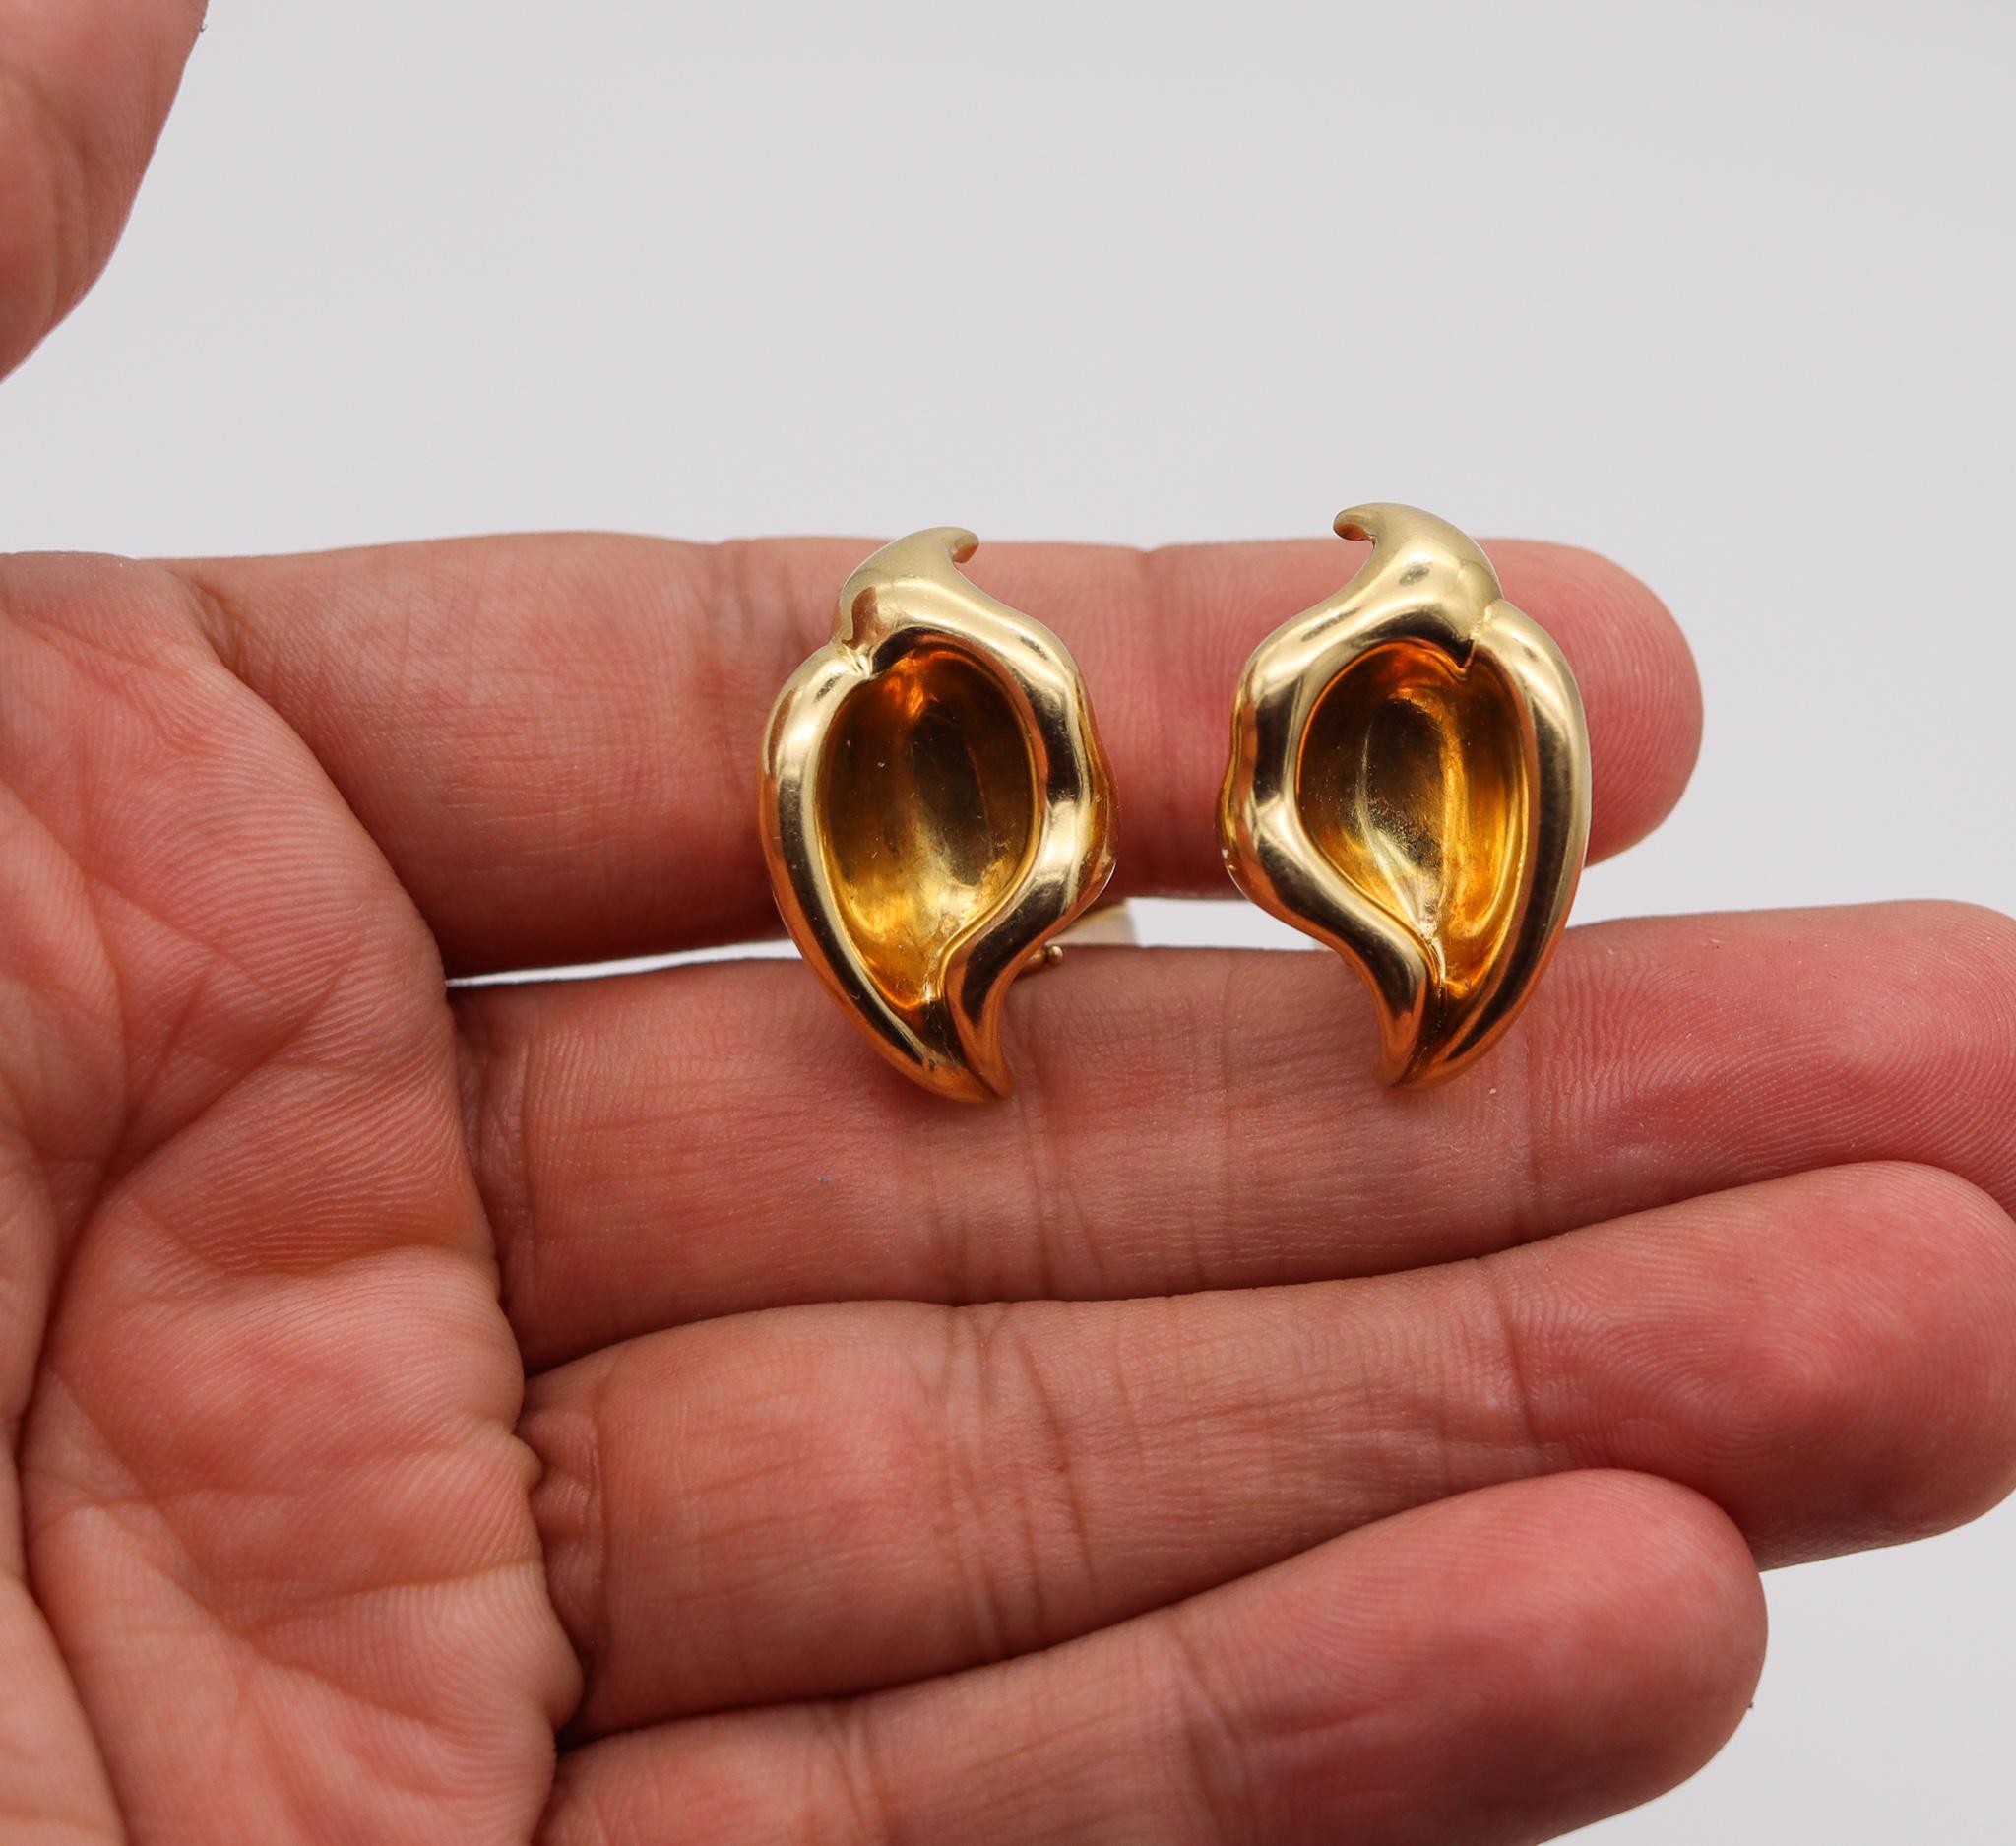 Modernist Tiffany & Co. 1980 by Elsa Peretti Sculptural Calla Lily Earrings in 18kt Gold